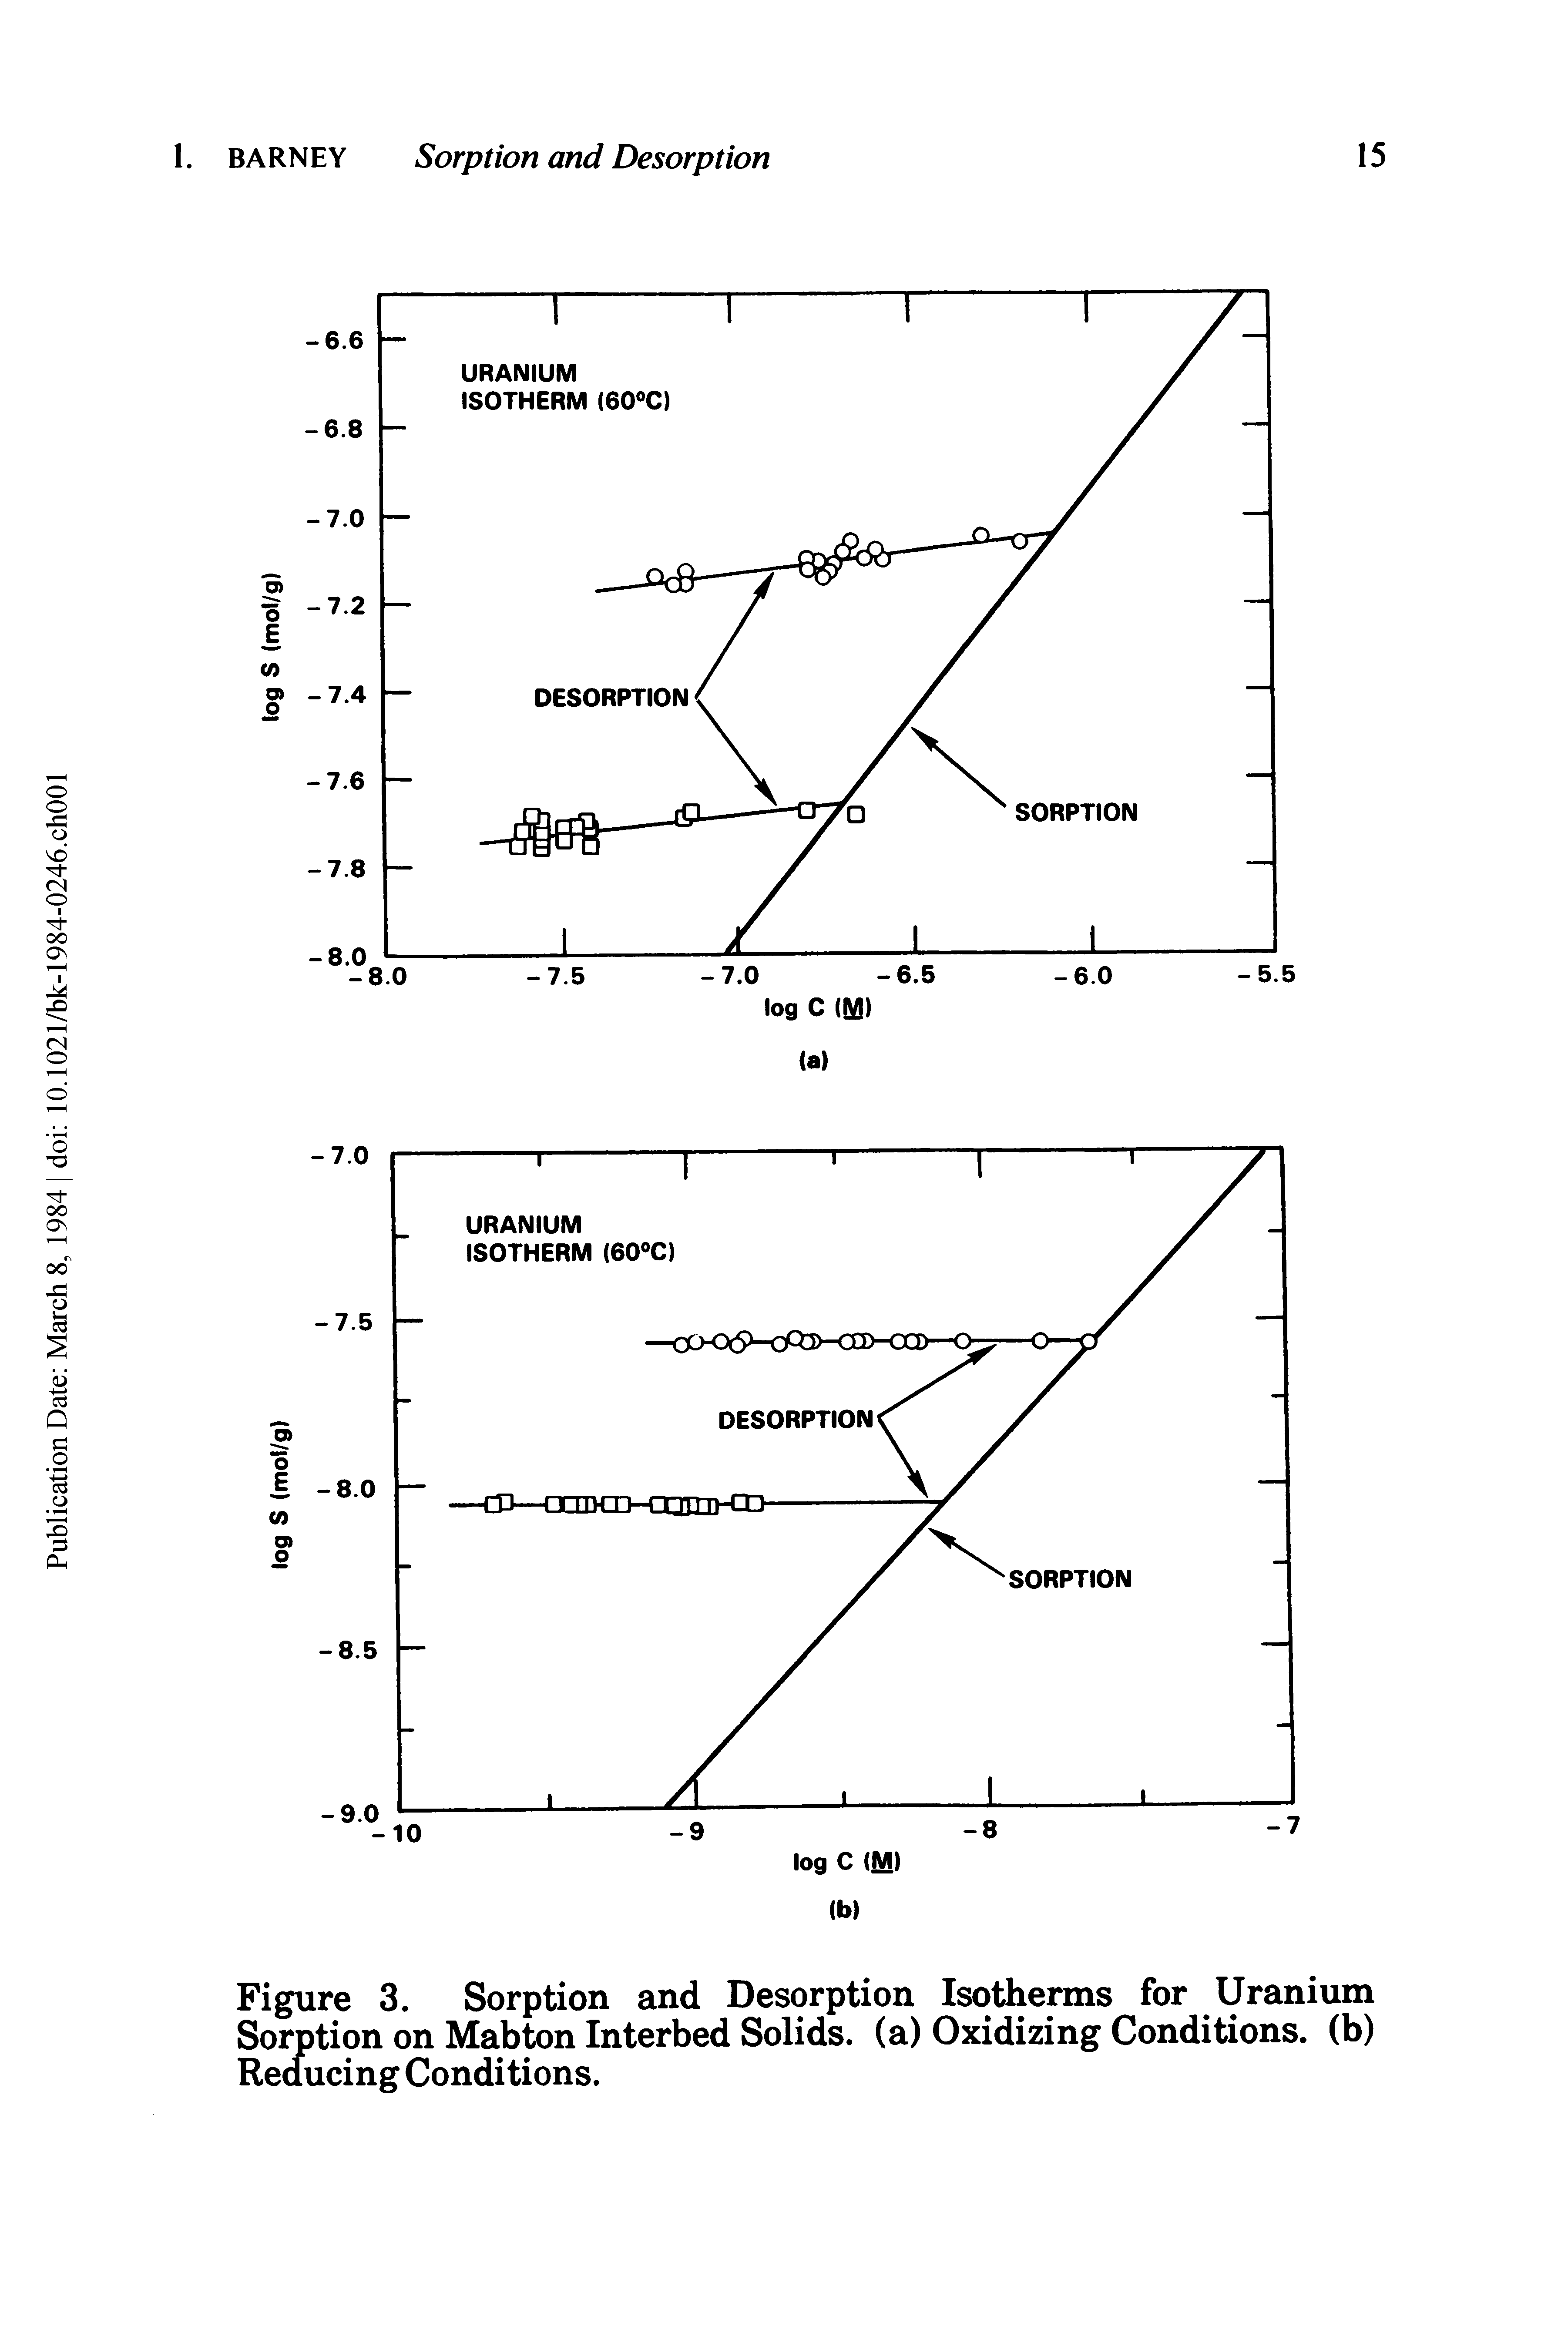 Figure 3. Sorption and Desorption Isotherms for Uranium Sorption on Mabton Interbed Solids, (a) Oxidizing Conditions, (b) Reducing Conditions.